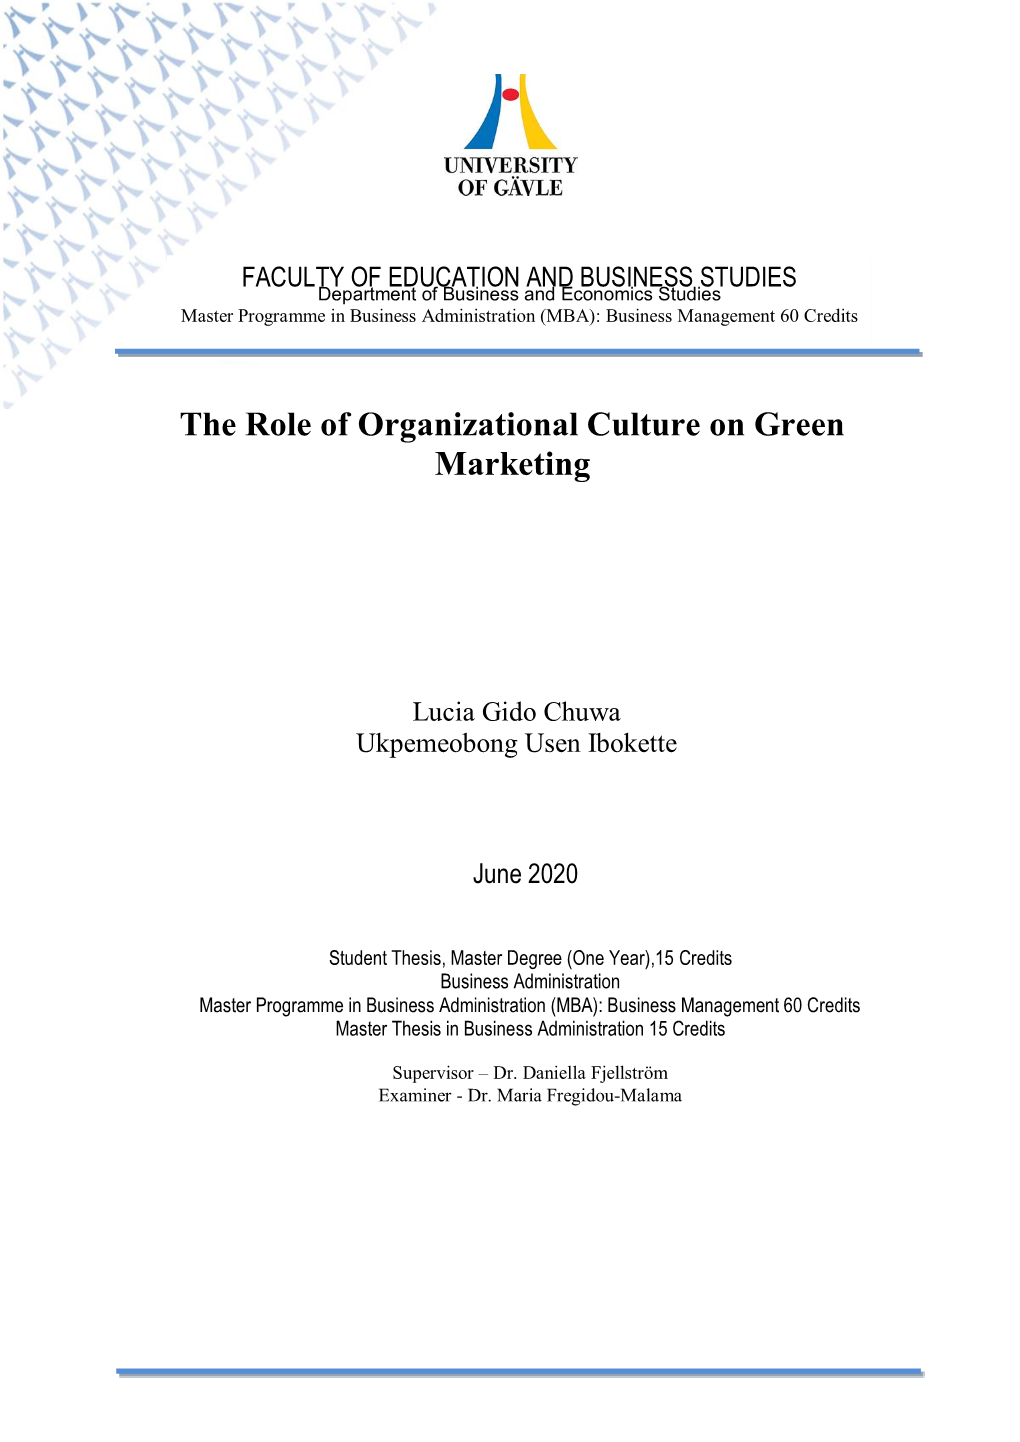 The Role of Organizational Culture on Green Marketing